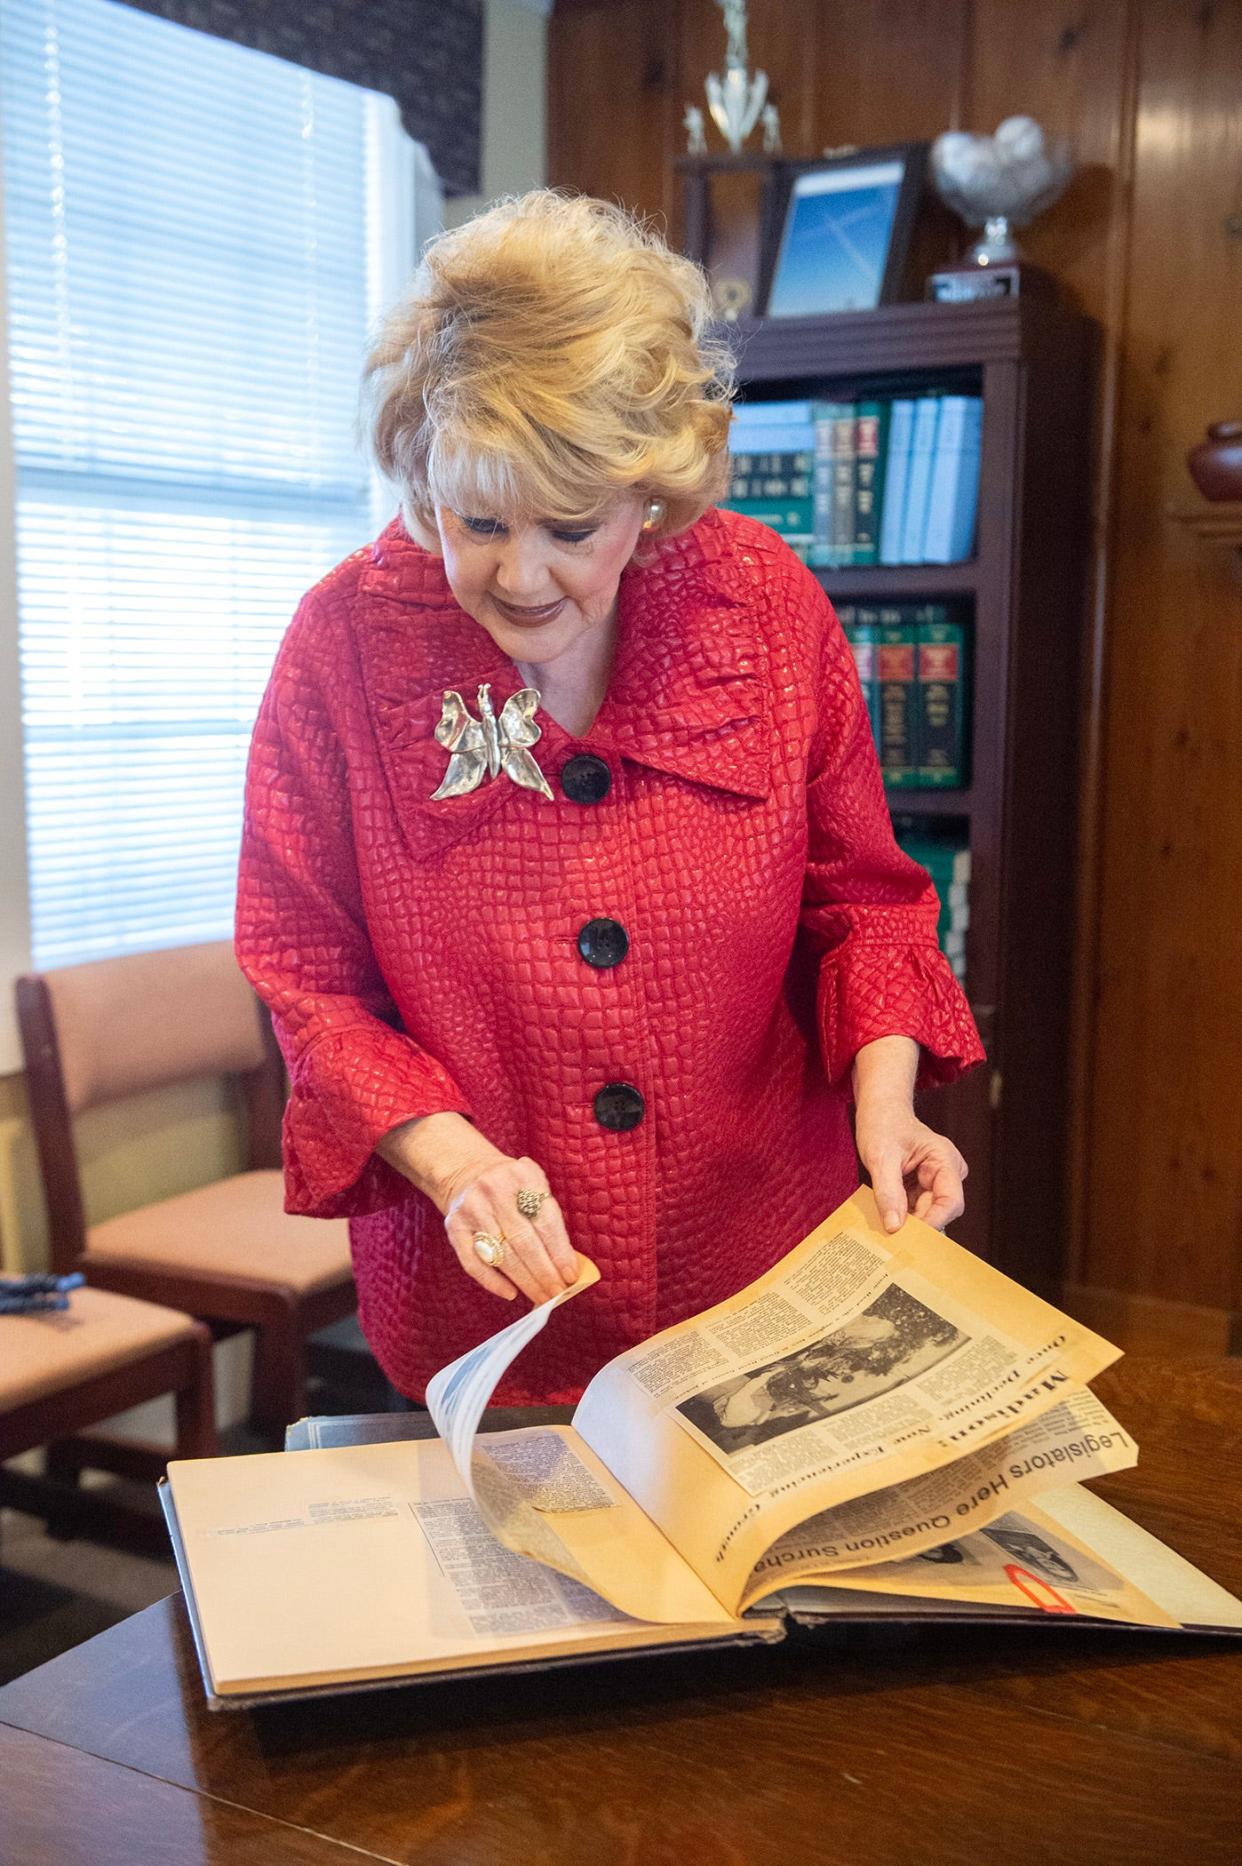 Madison Mayor Mary Hawkins Butler flips through one of her scrapbooks at city hall on Monday, Dec. 11. The scrapbooks trace her career from antique dealer to alderman to mayor.